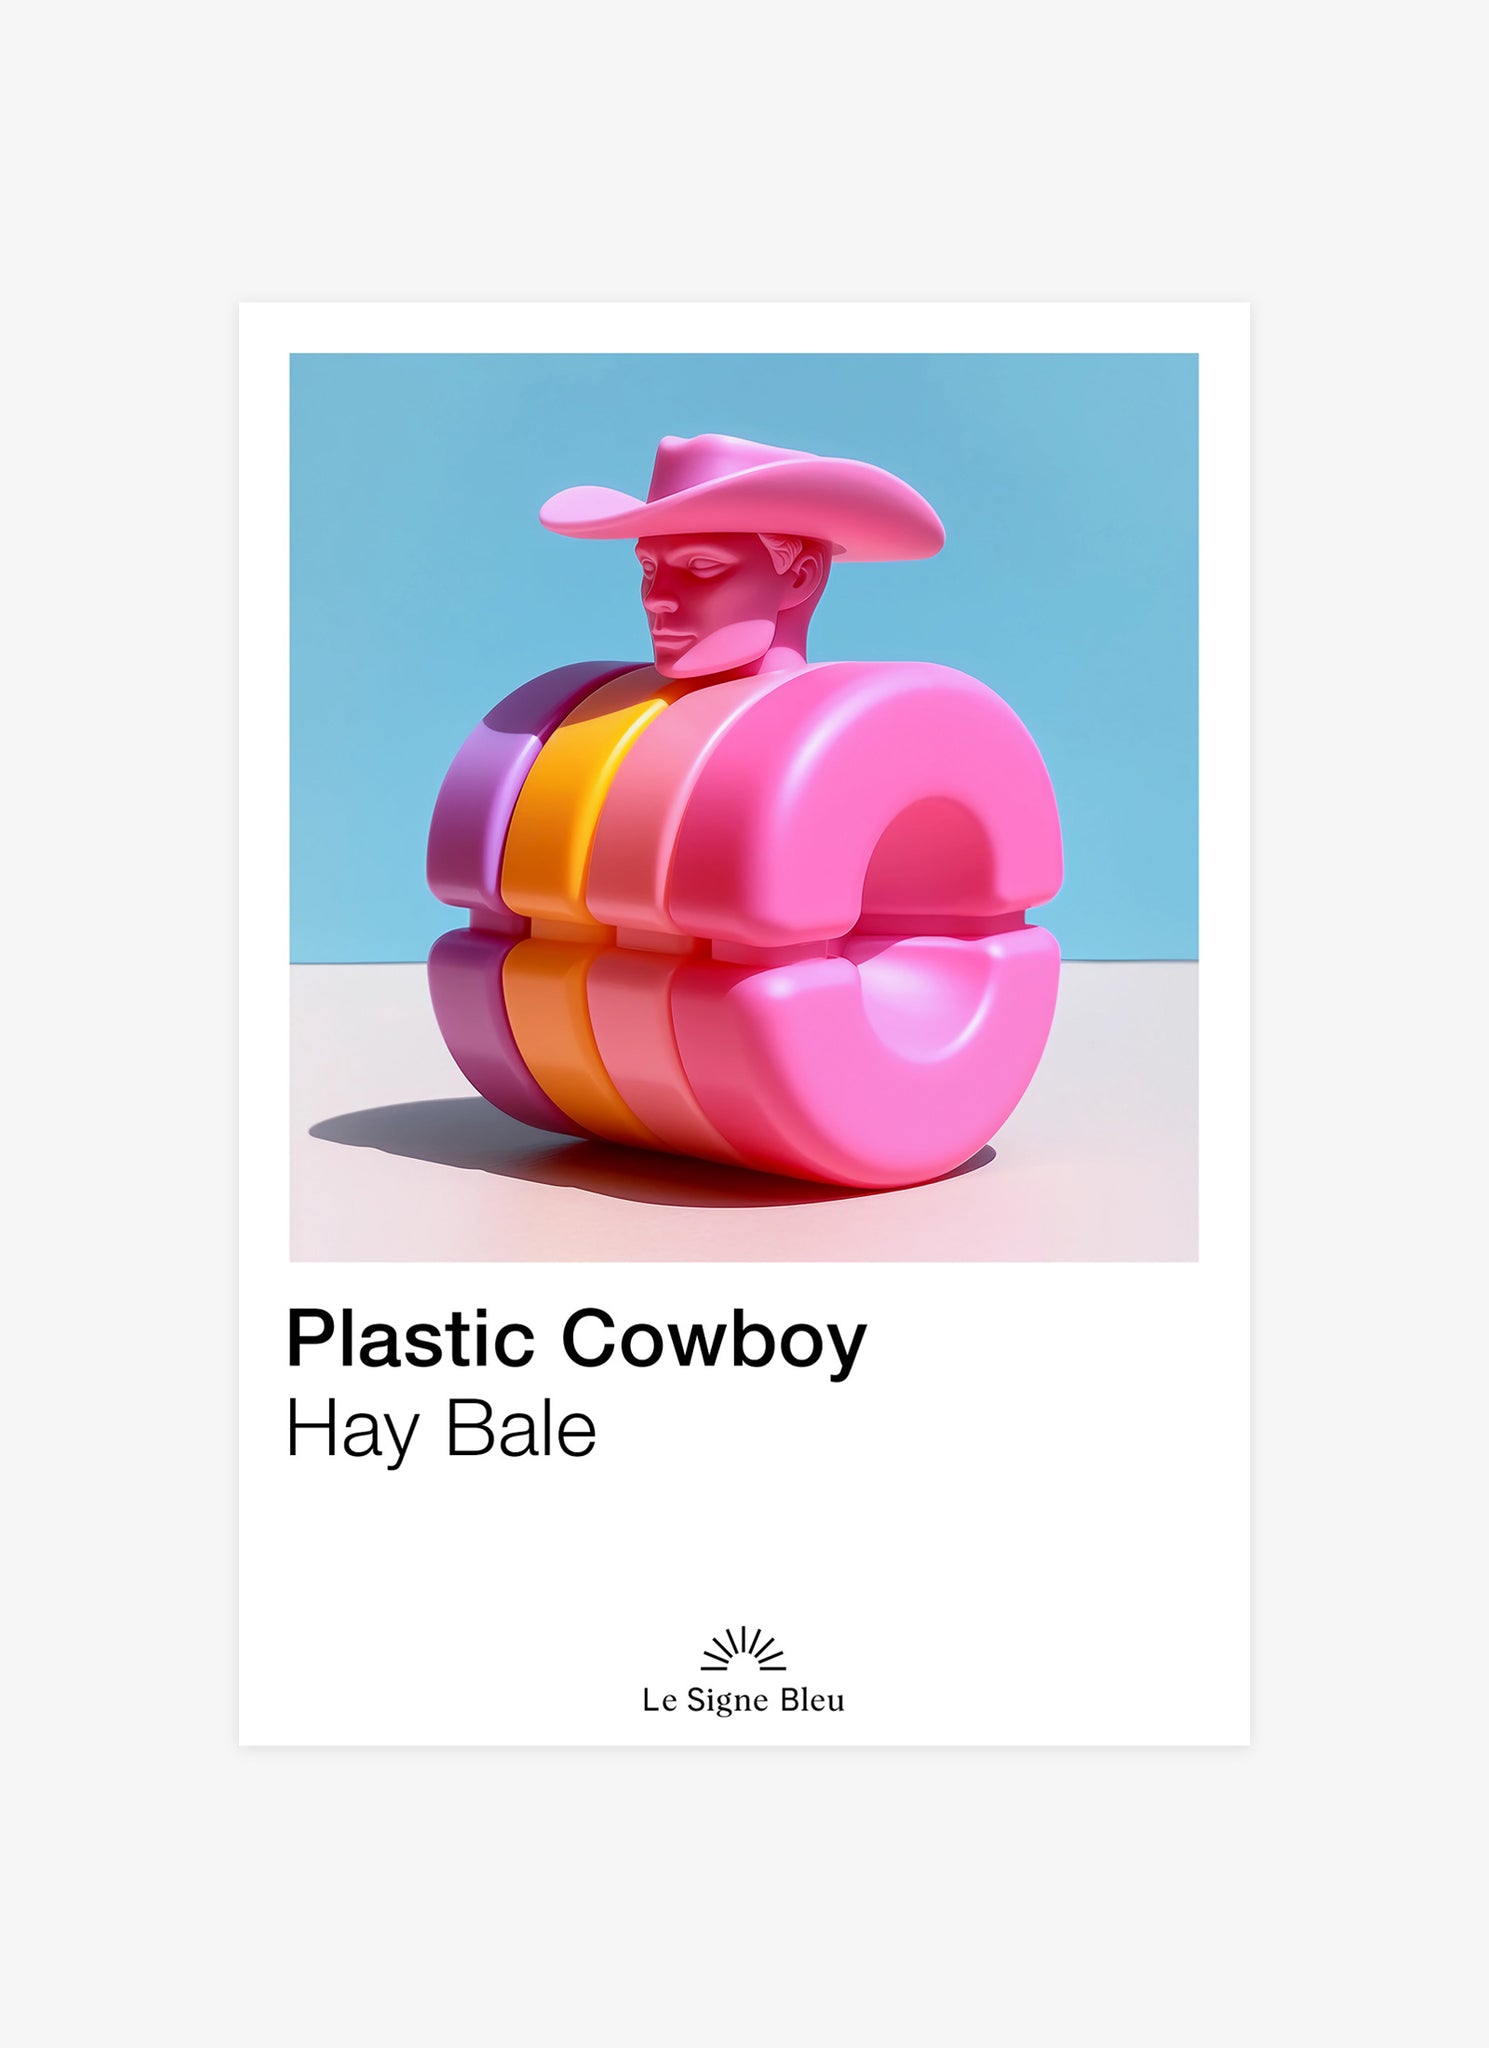 Plastic Cowboy - Hay Bale (signed poster)